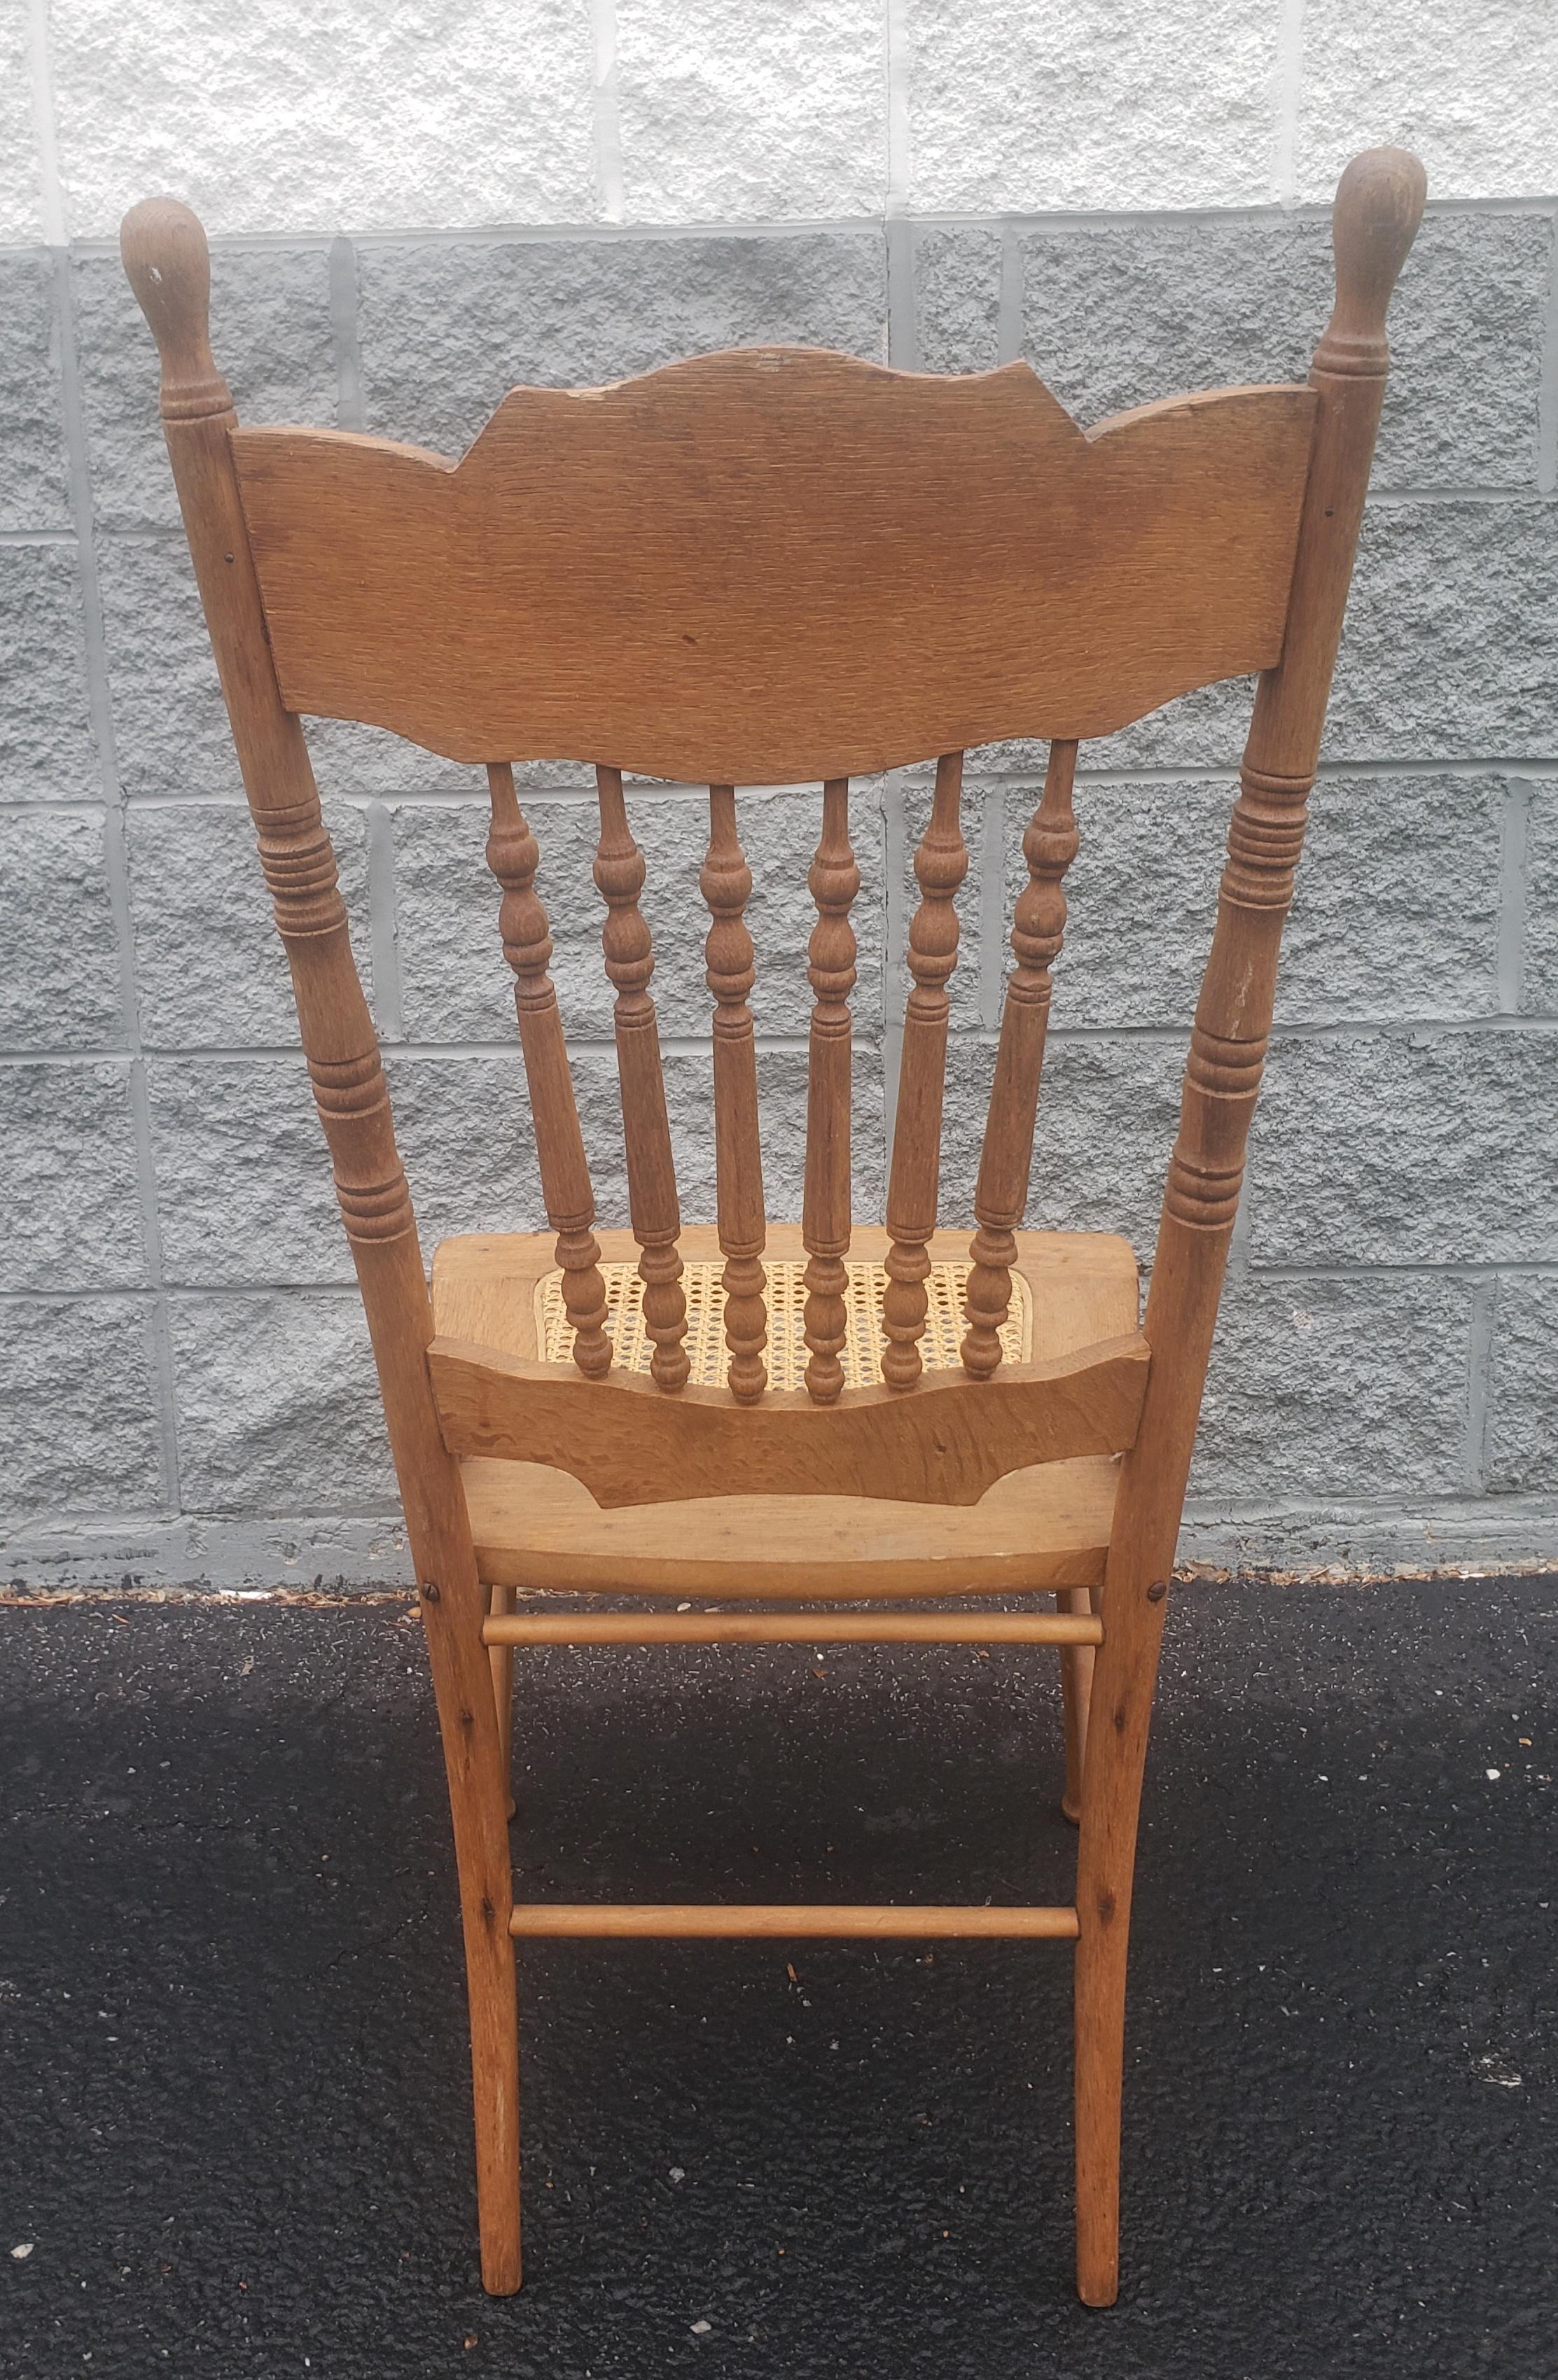 Midcentury Pressback Spindle Oak and Cane Country Dining Chair (amerikanisch) im Angebot